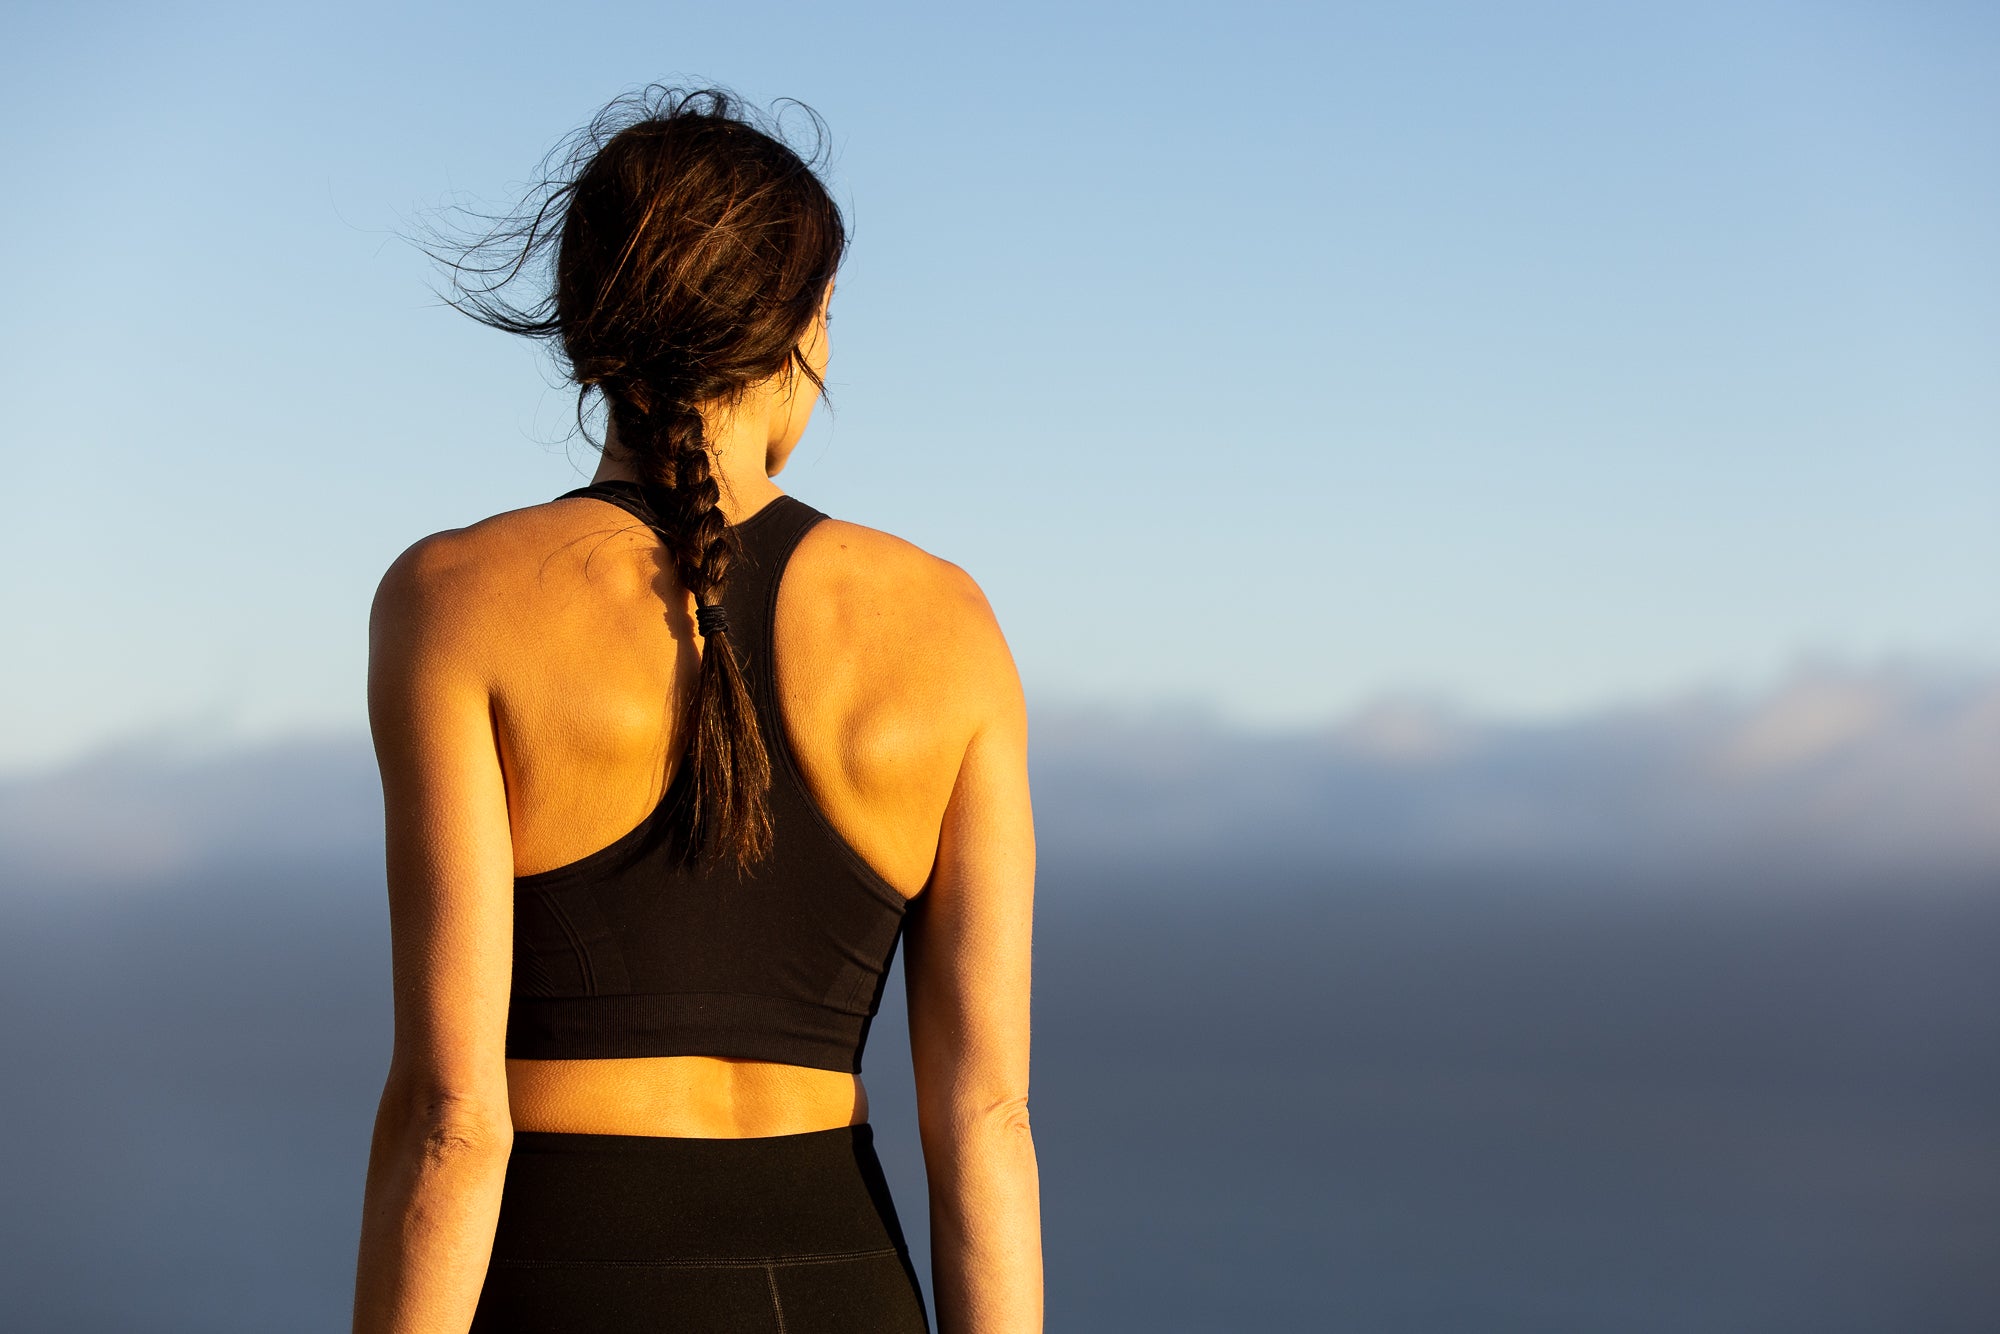 a woman on a trip wearing a Send-It Merino Wool Sports Bra looking out over cloudy mountains